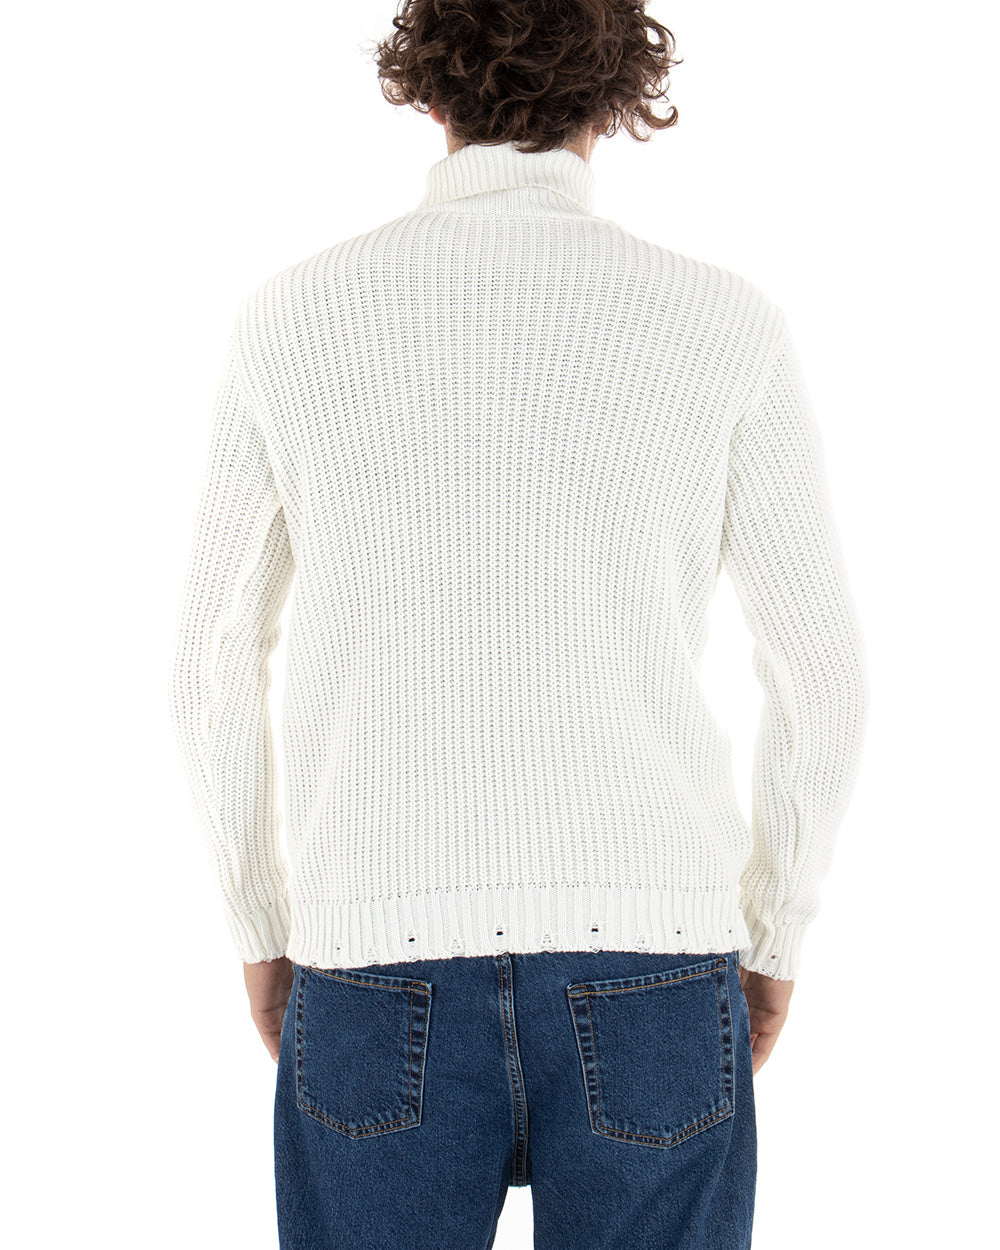 Men's High Neck Perforated Sweater Solid White Paul Barrell Casual GIOSAL